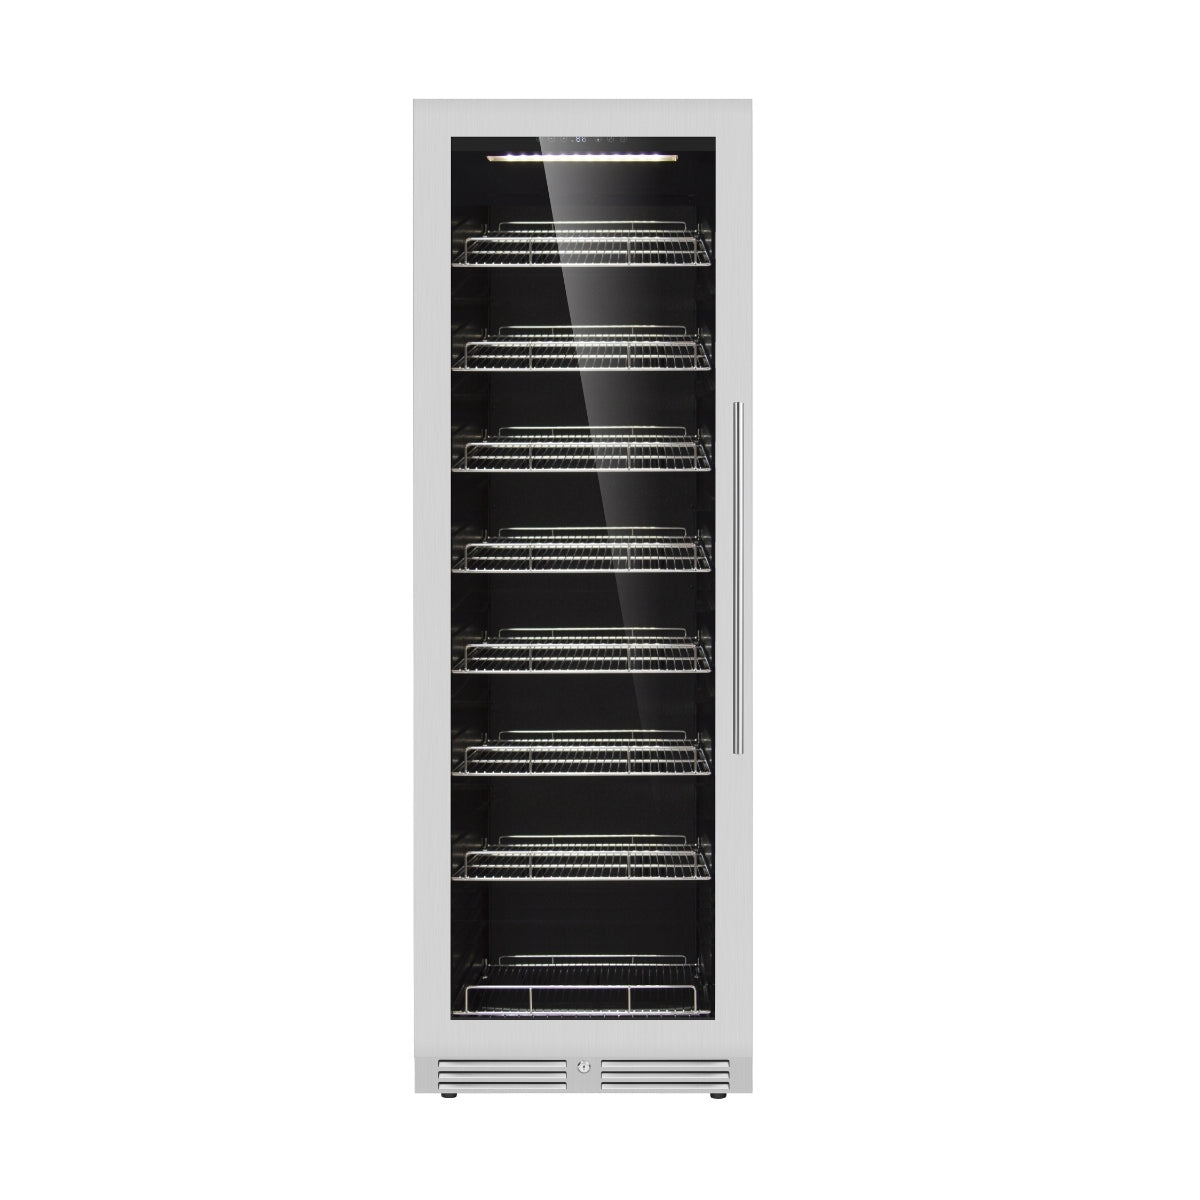 Large Beverage Refrigerator With Low-E Glass Door